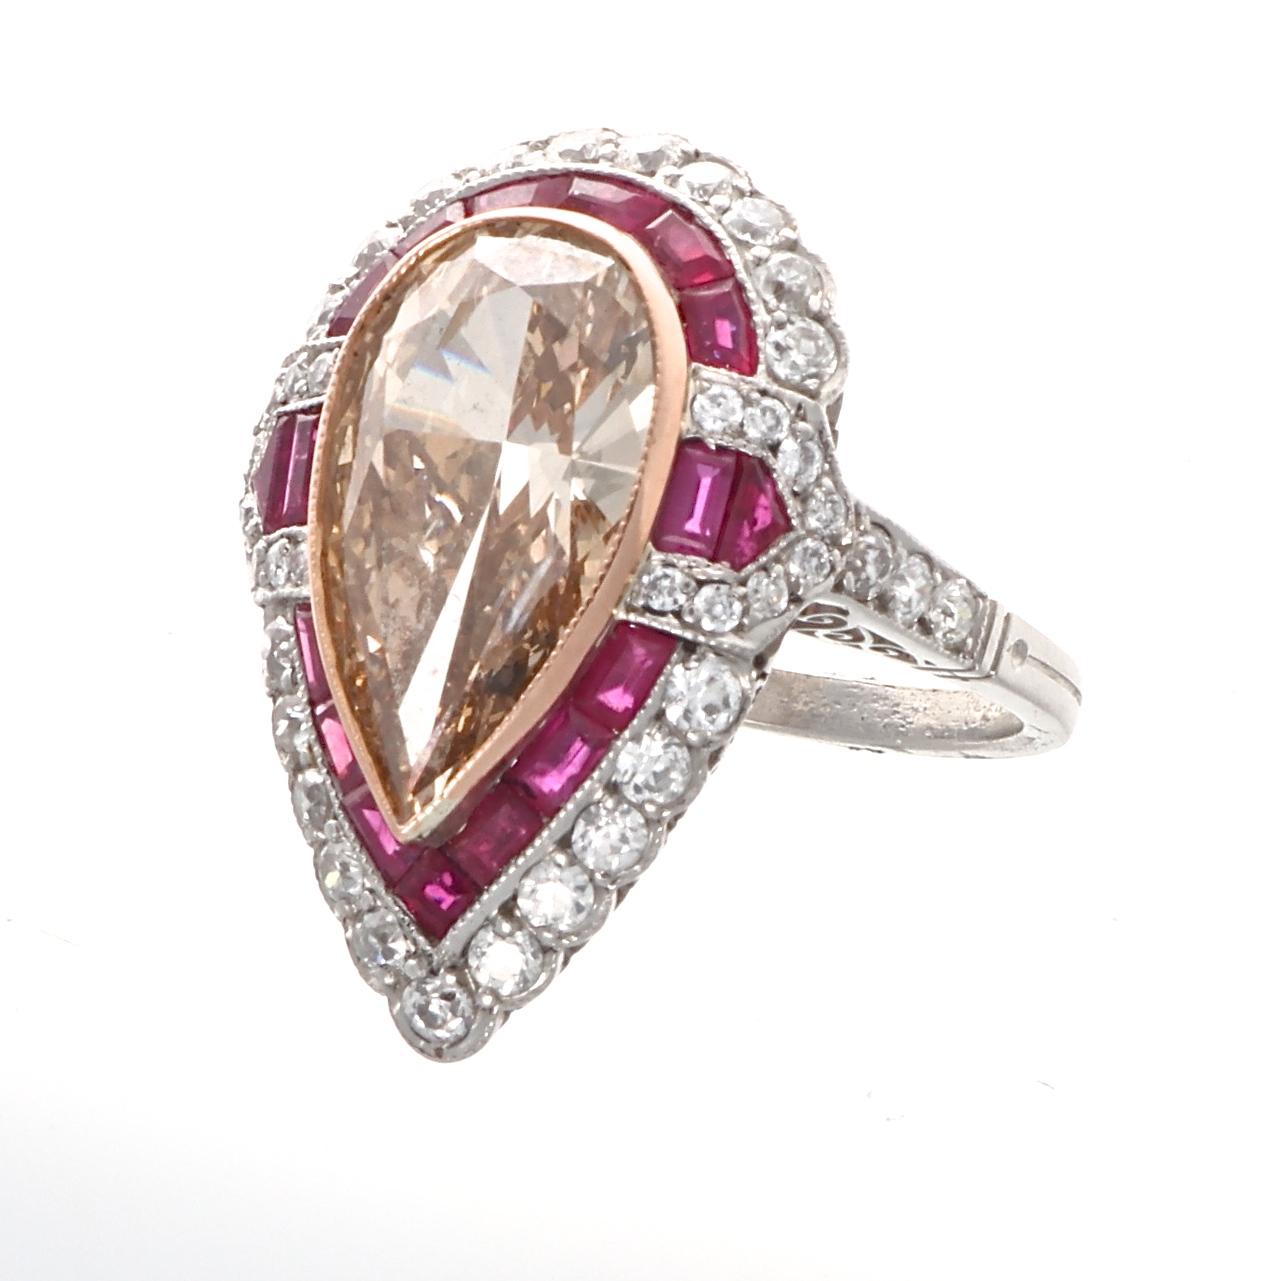 Pure artistry in using gemstones as the paintbrush and the ring as palette. Featuring a 4.44 carat natural fancy brownish-orange pear shaped diamond geometrically outlined by vibrant red rubies and numerous near colorless diamonds. Crafted in